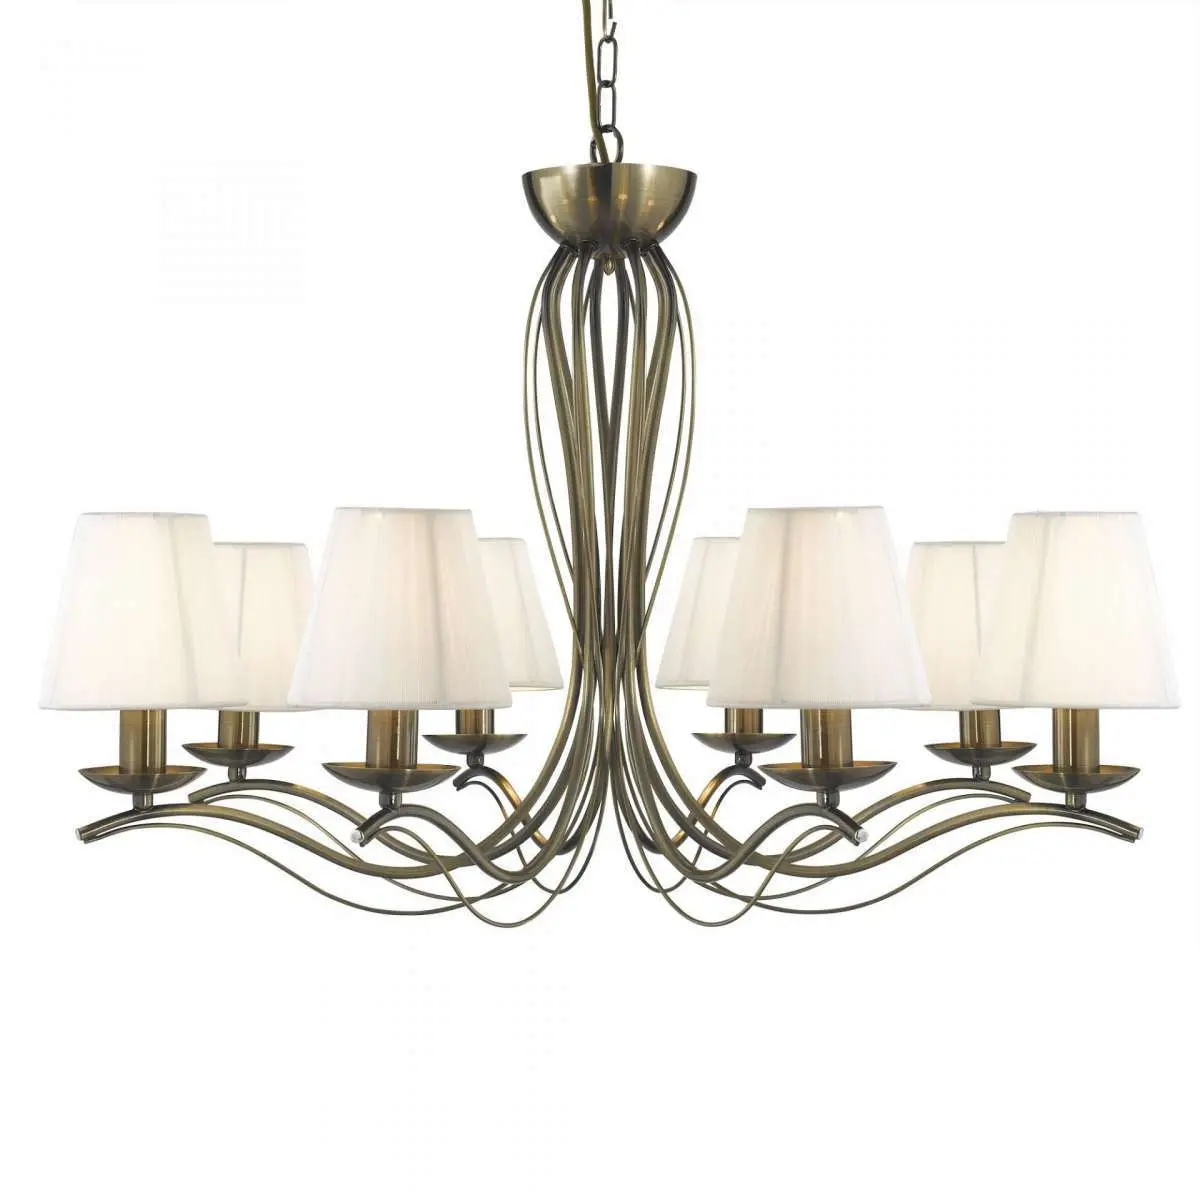 Searchlight 9828-8AB Andretti Antique Brass 8 Light Fitting with Cream Shades